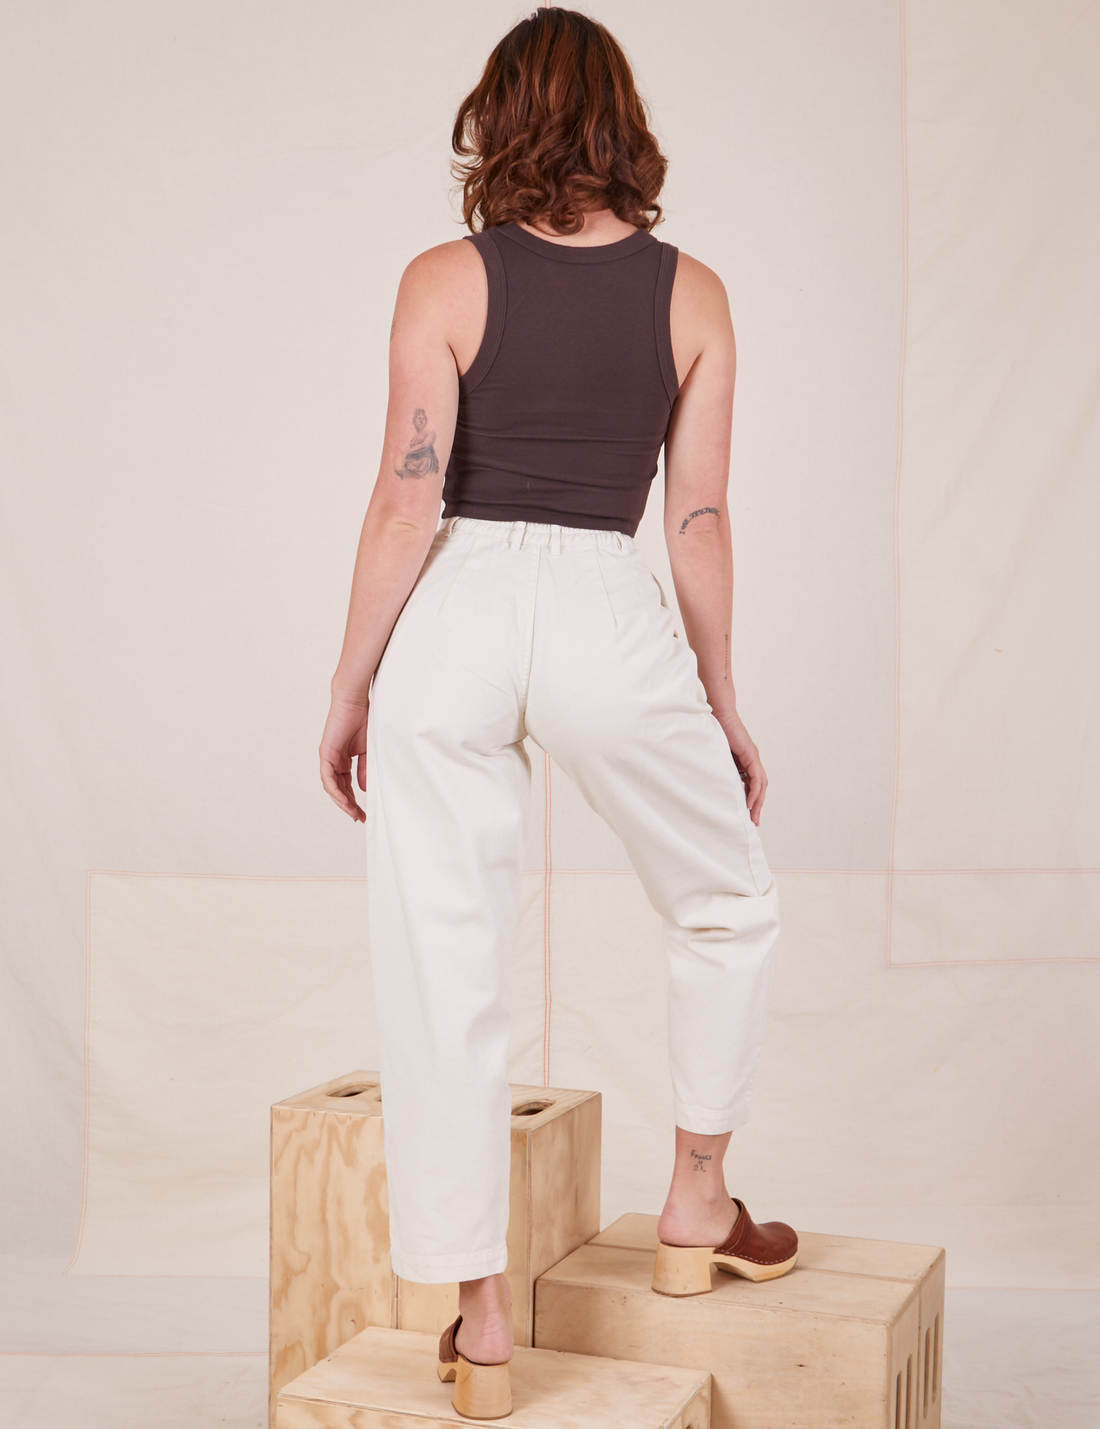 Back view of Heavyweight Trousers in Vintage Off-White and espresso brown Tank Top worn by Alex.